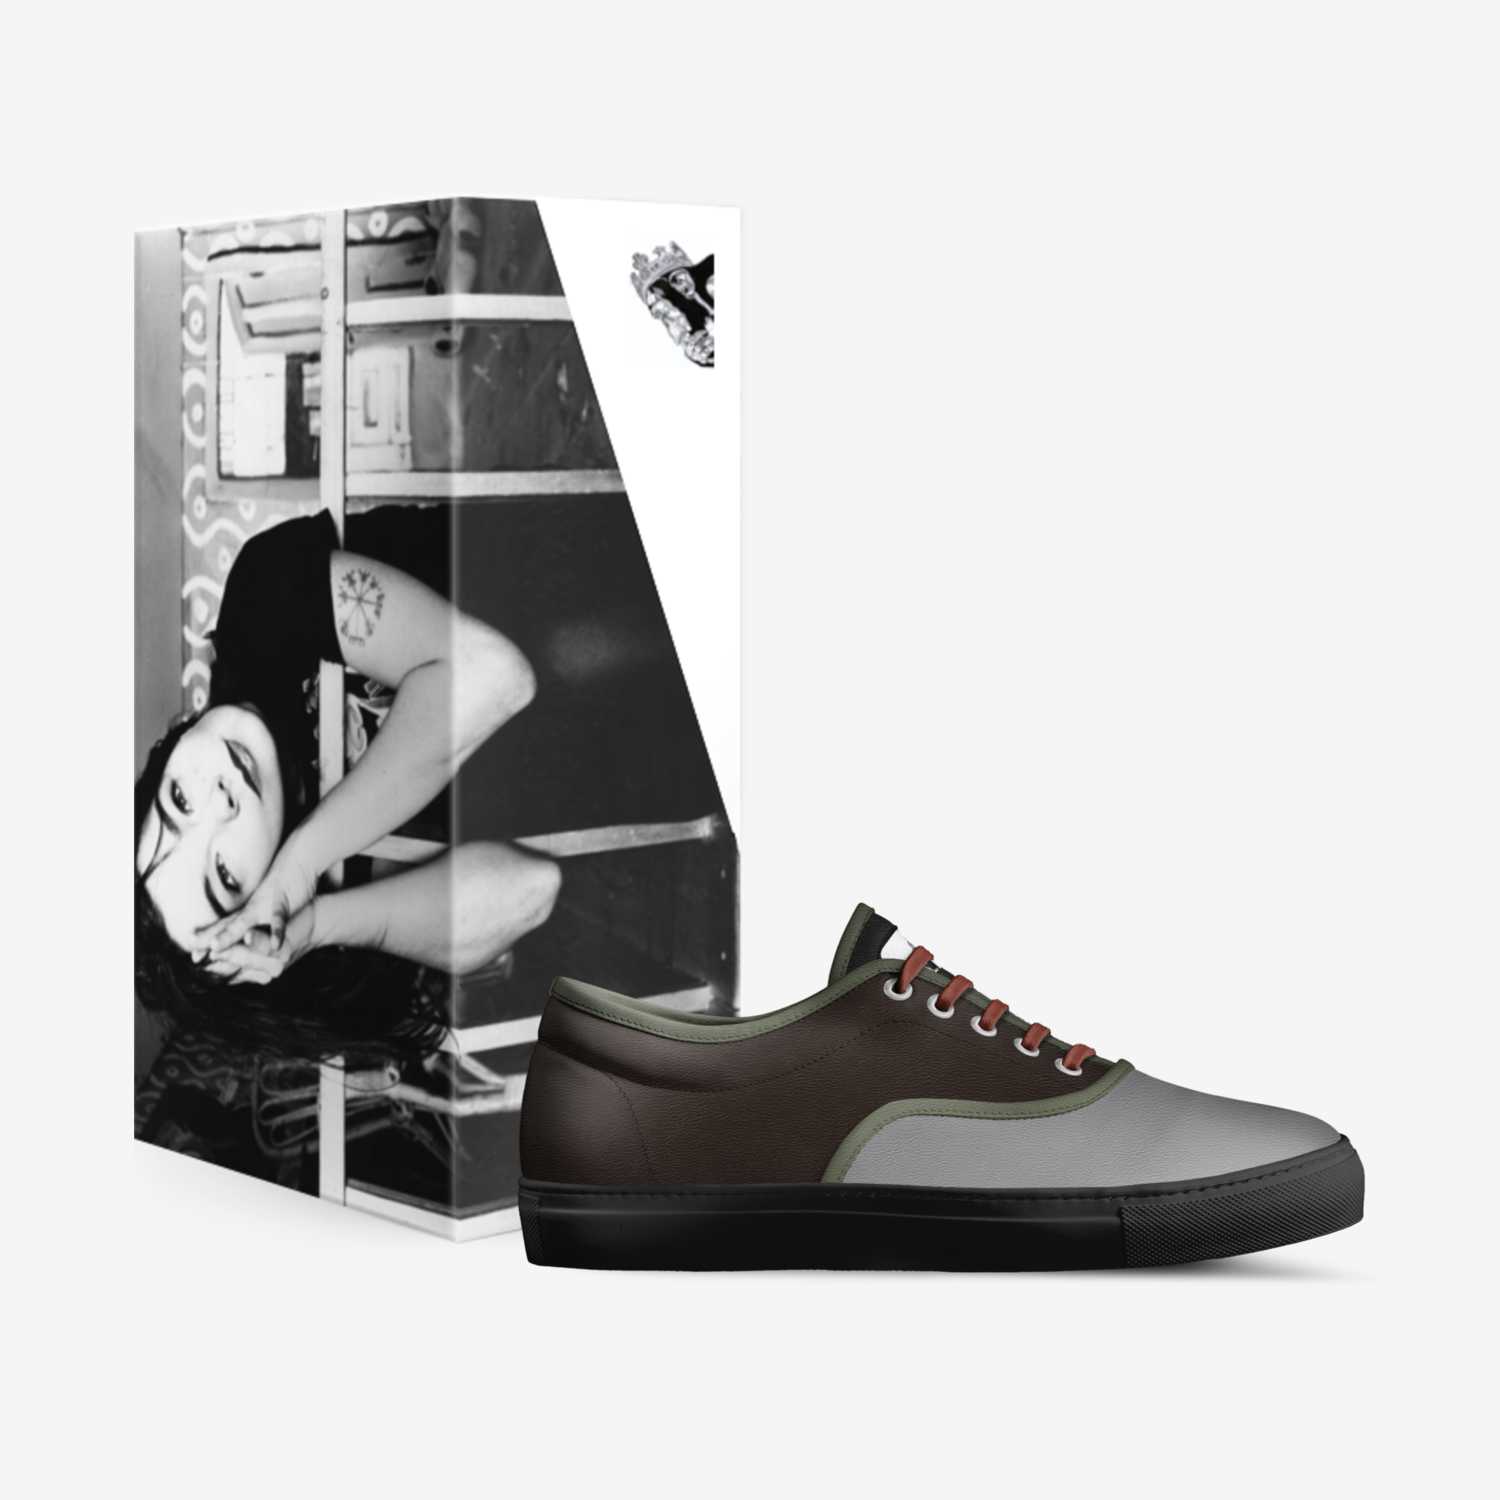 HYSTERIA custom made in Italy shoes by Federico Lanciotti | Box view